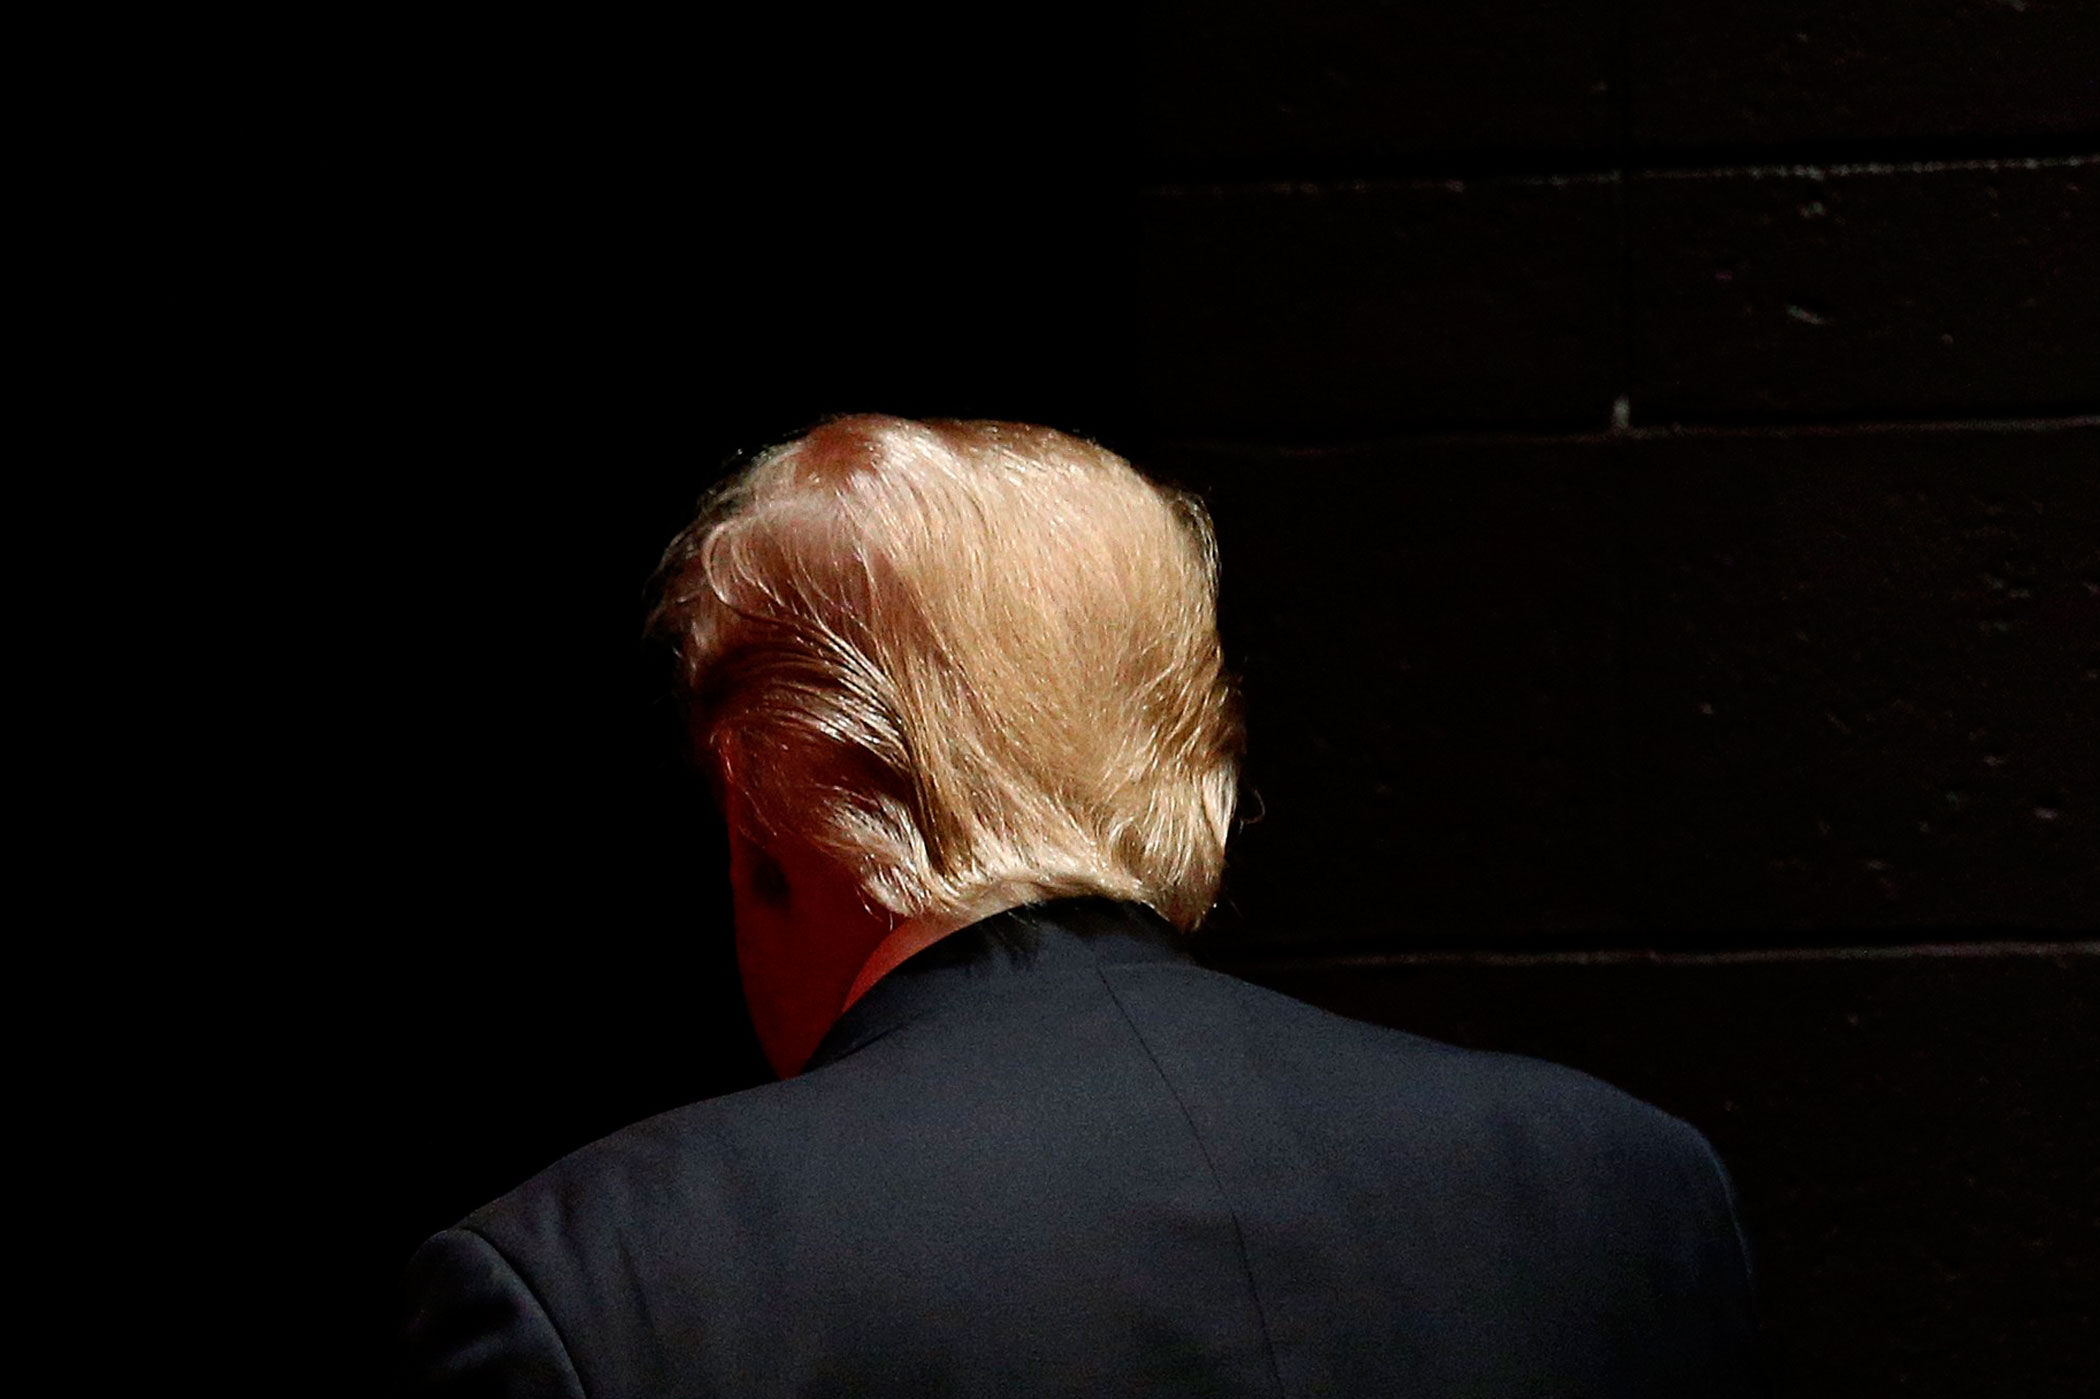 Republican presidential candidate Donald Trump walks off stage after speaking at a campaign event at St. Norbert College in De Pere, Wis., on March 30, 2016.